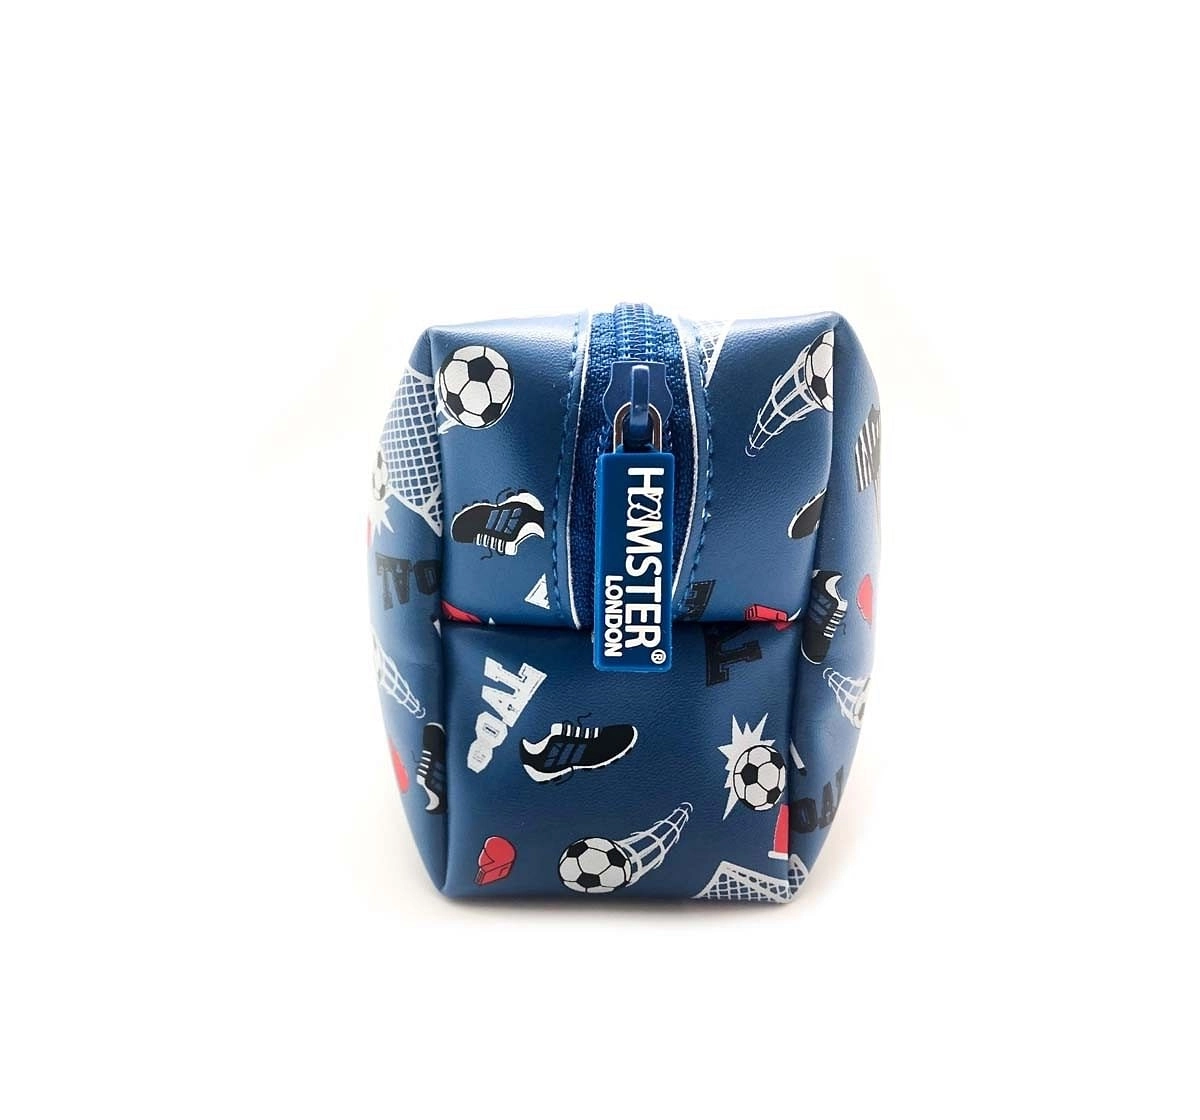 Hamster London Rectangle Pouch Football Bags for Age 3Y+ (Blue)